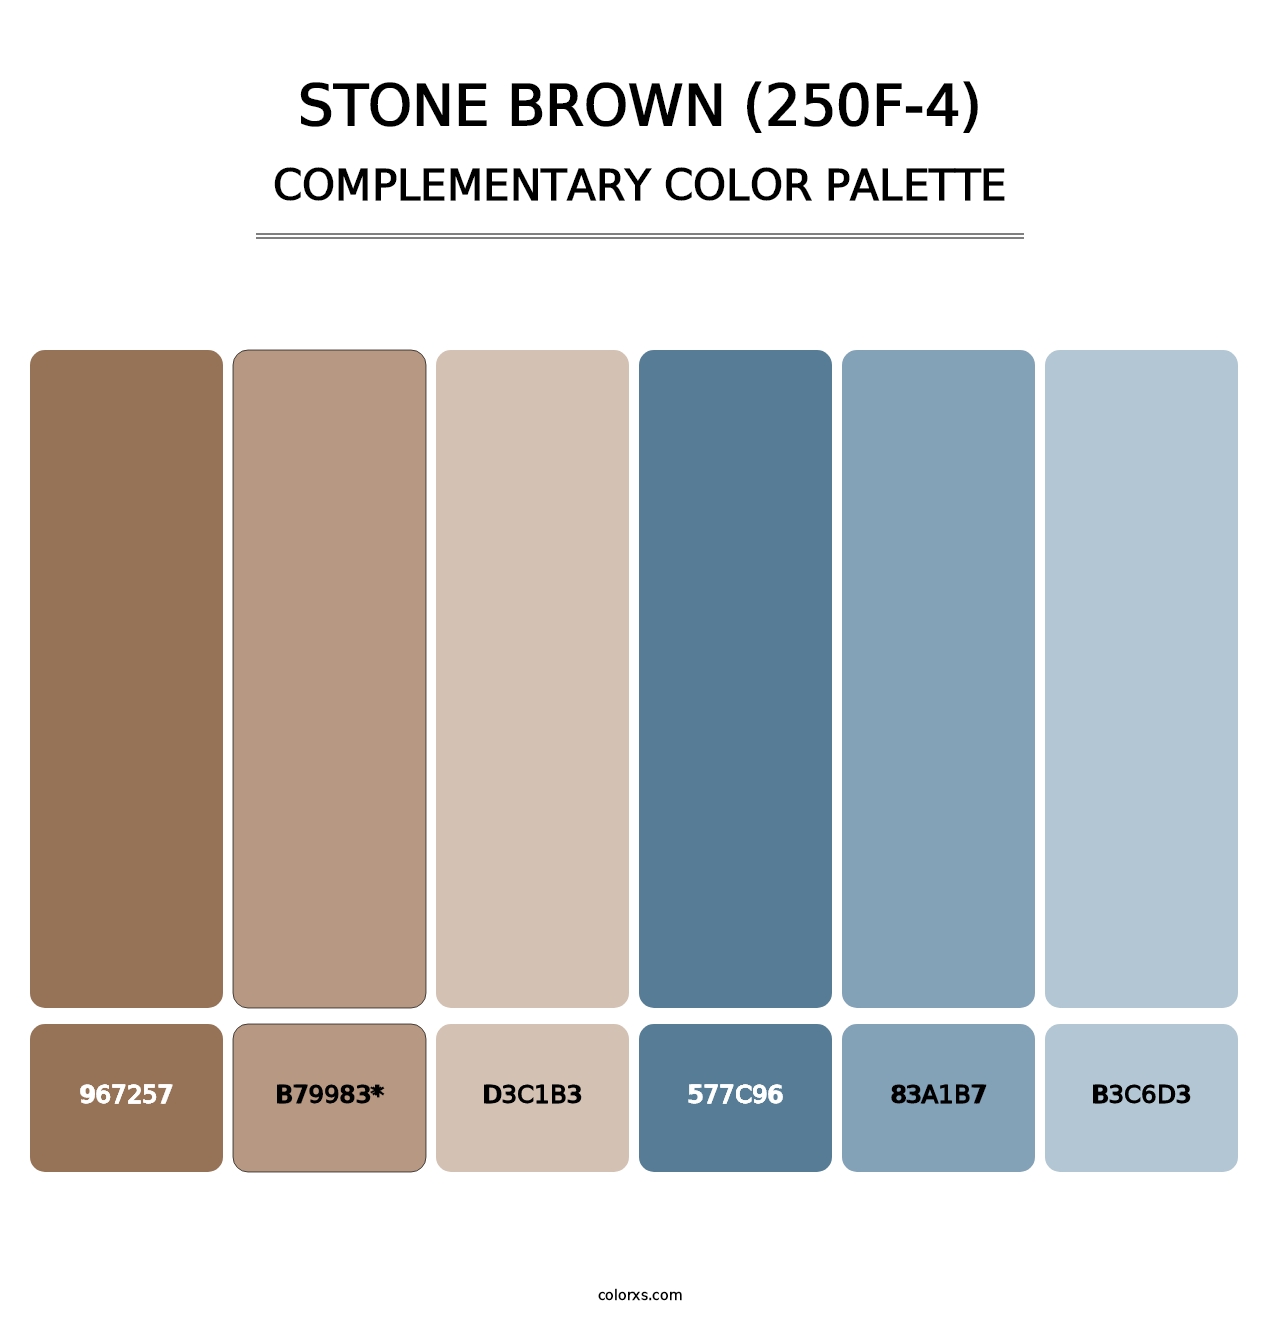 Stone Brown (250F-4) - Complementary Color Palette